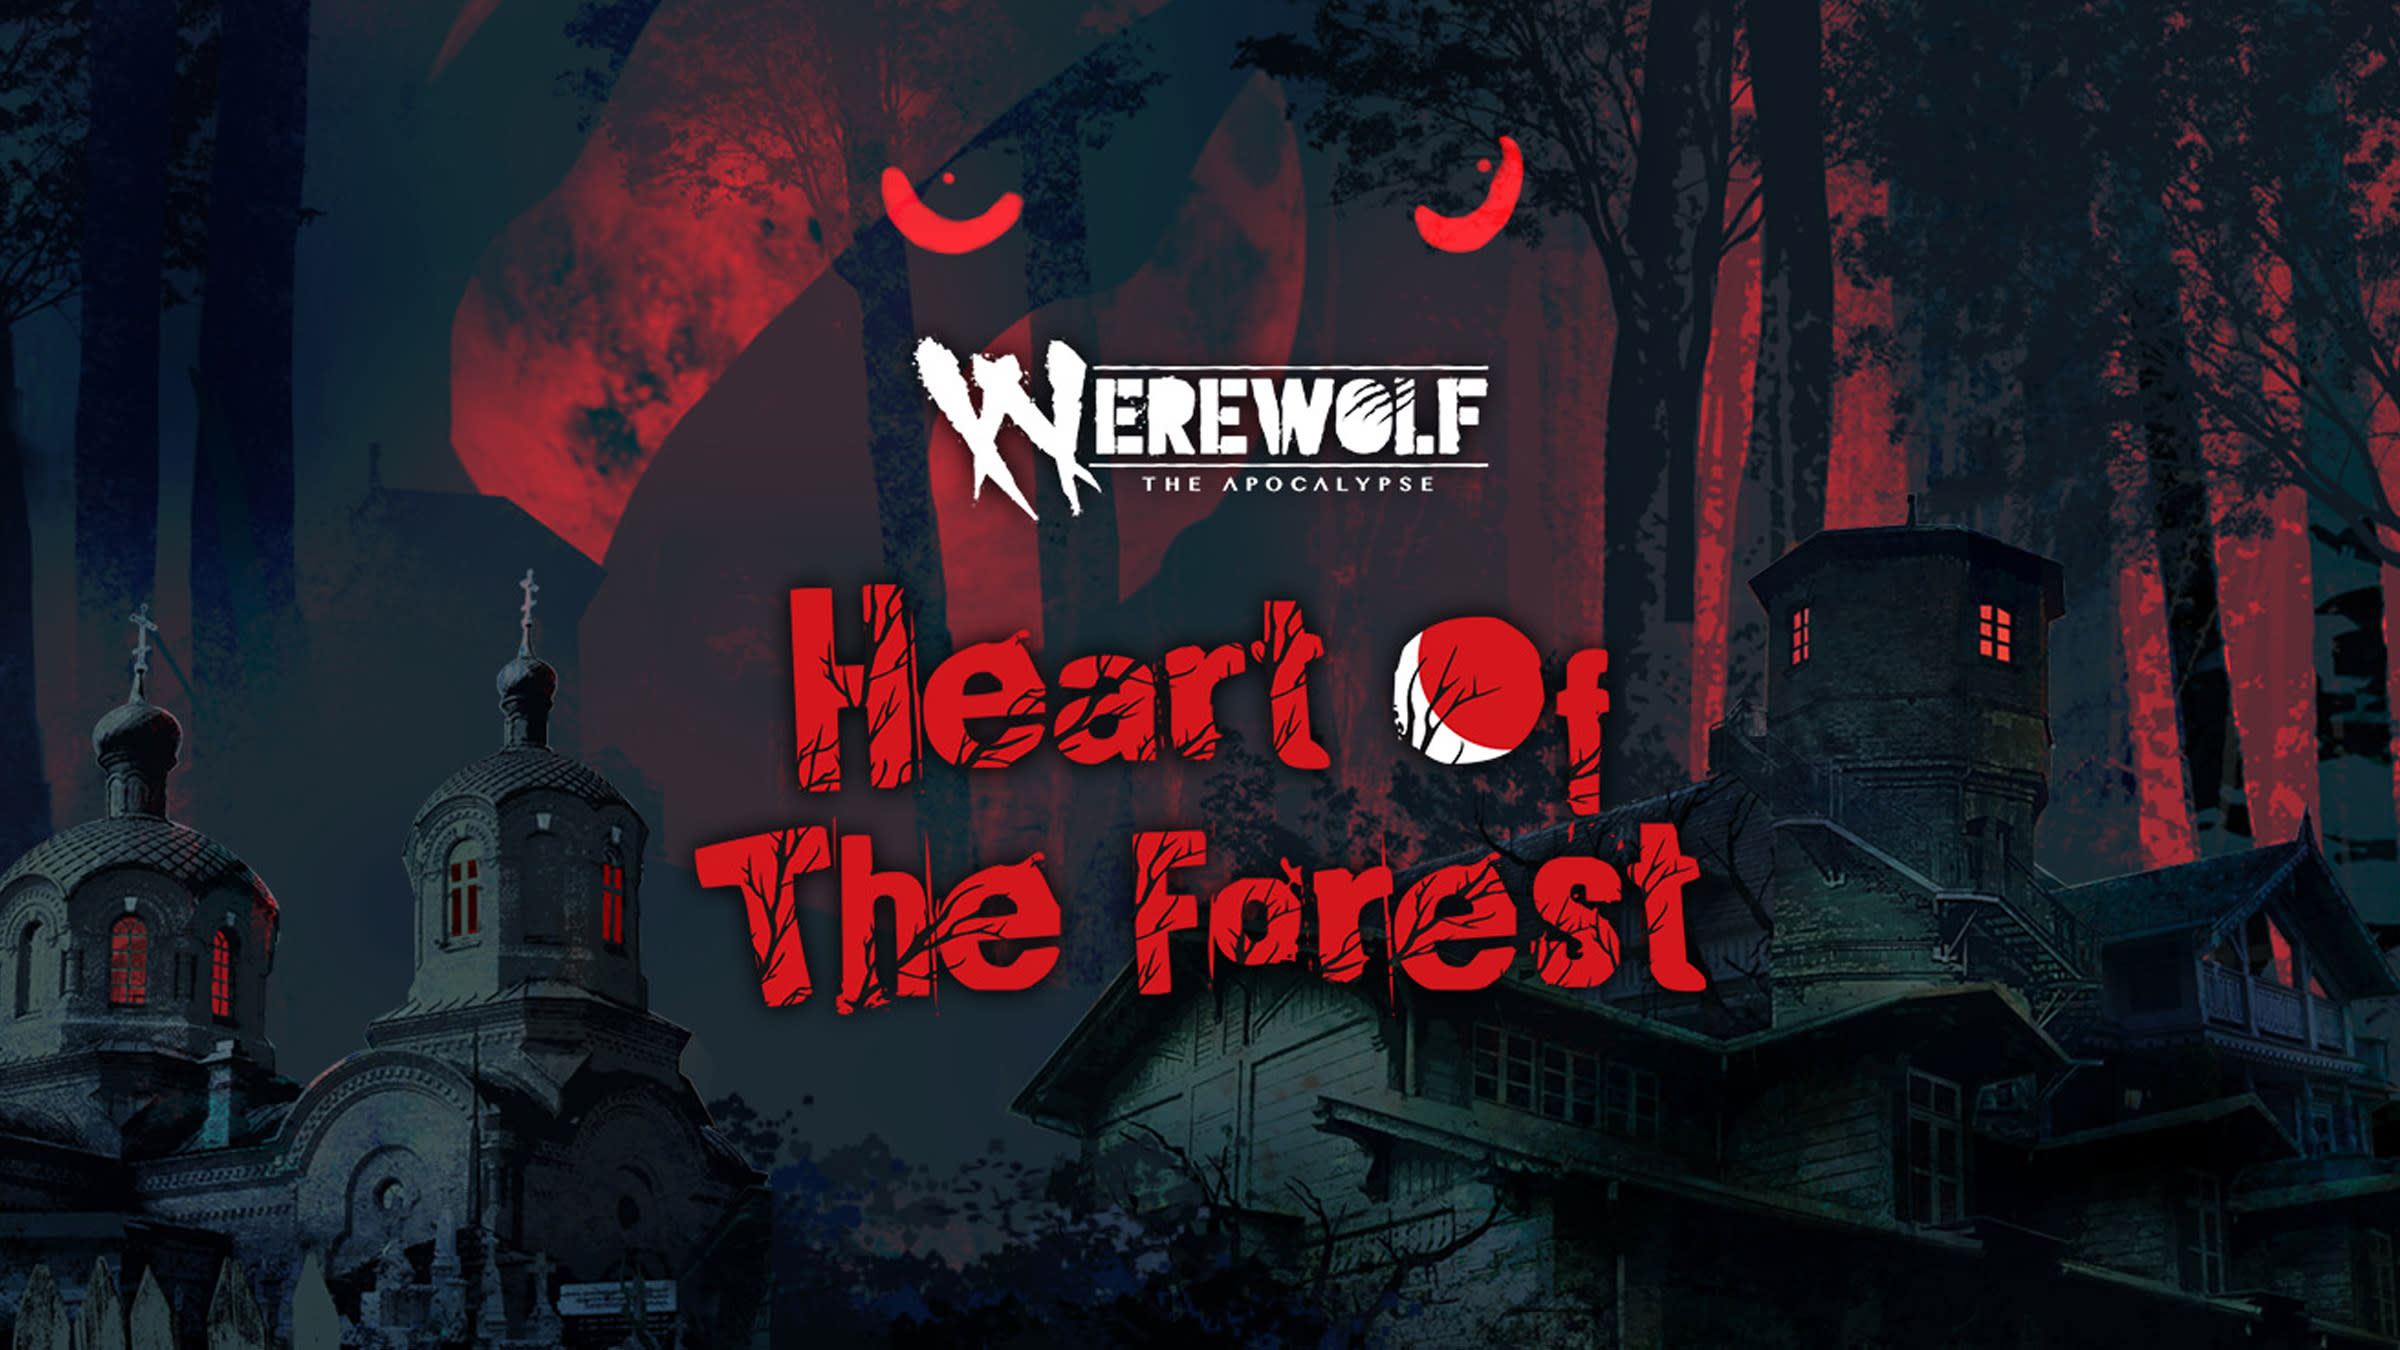 Werewolf: The Apocalypse - Heart of the Forest